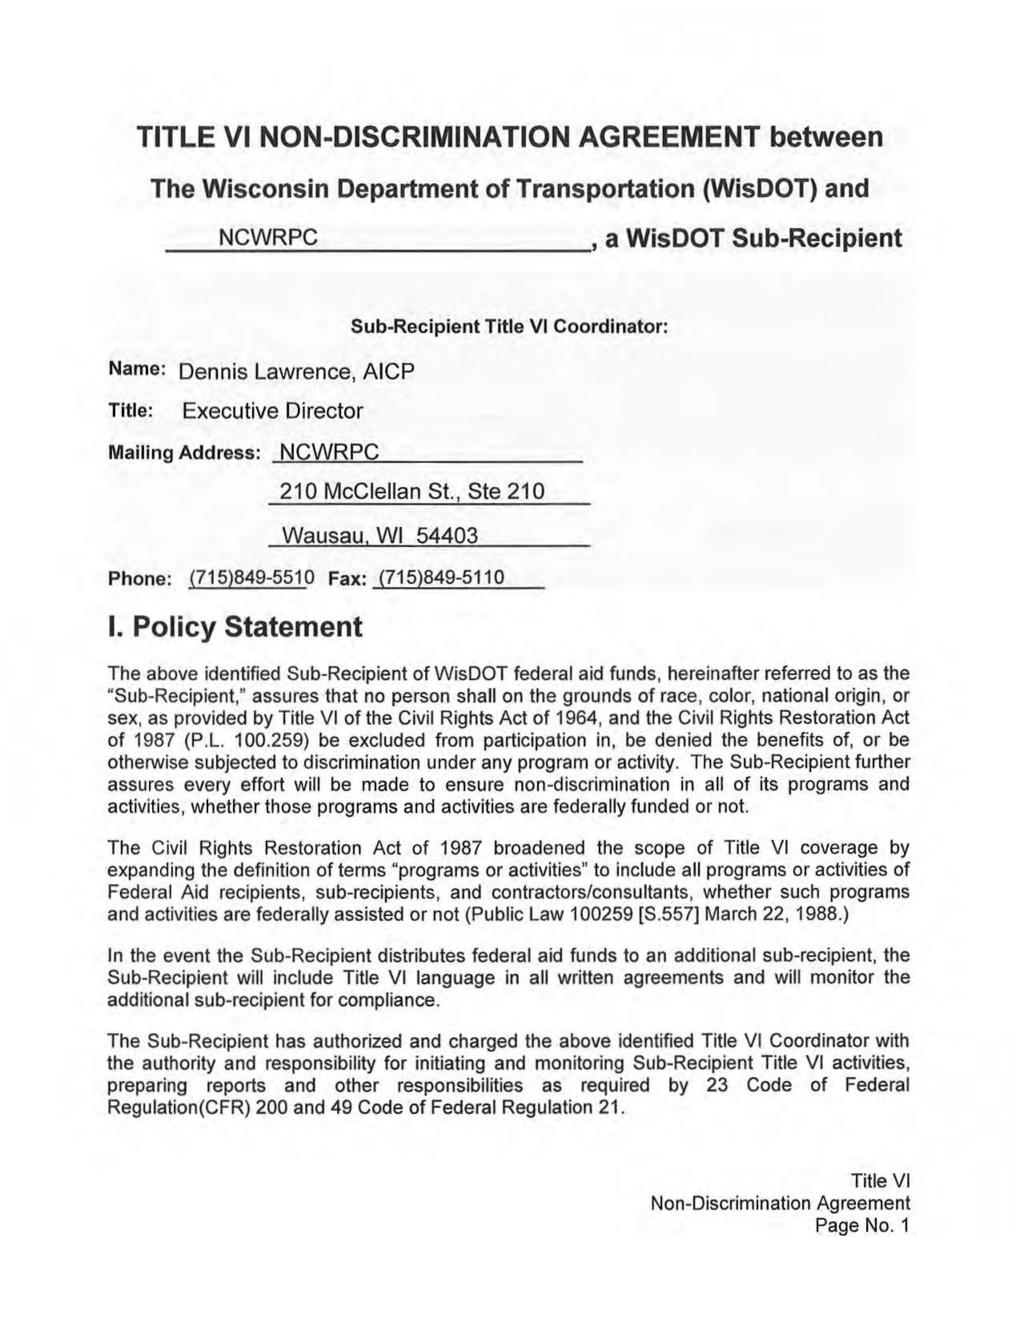 TITLE VI NON-DISCRIMINATION AGREEMENT between The Wisconsin Department of Transportation (WisDOT) and N_C_W_R_P_C, a WisDOT Sub-Recipient Name: Dennis Lawrence, AICP Sub-Recipient Coordinator: Title: